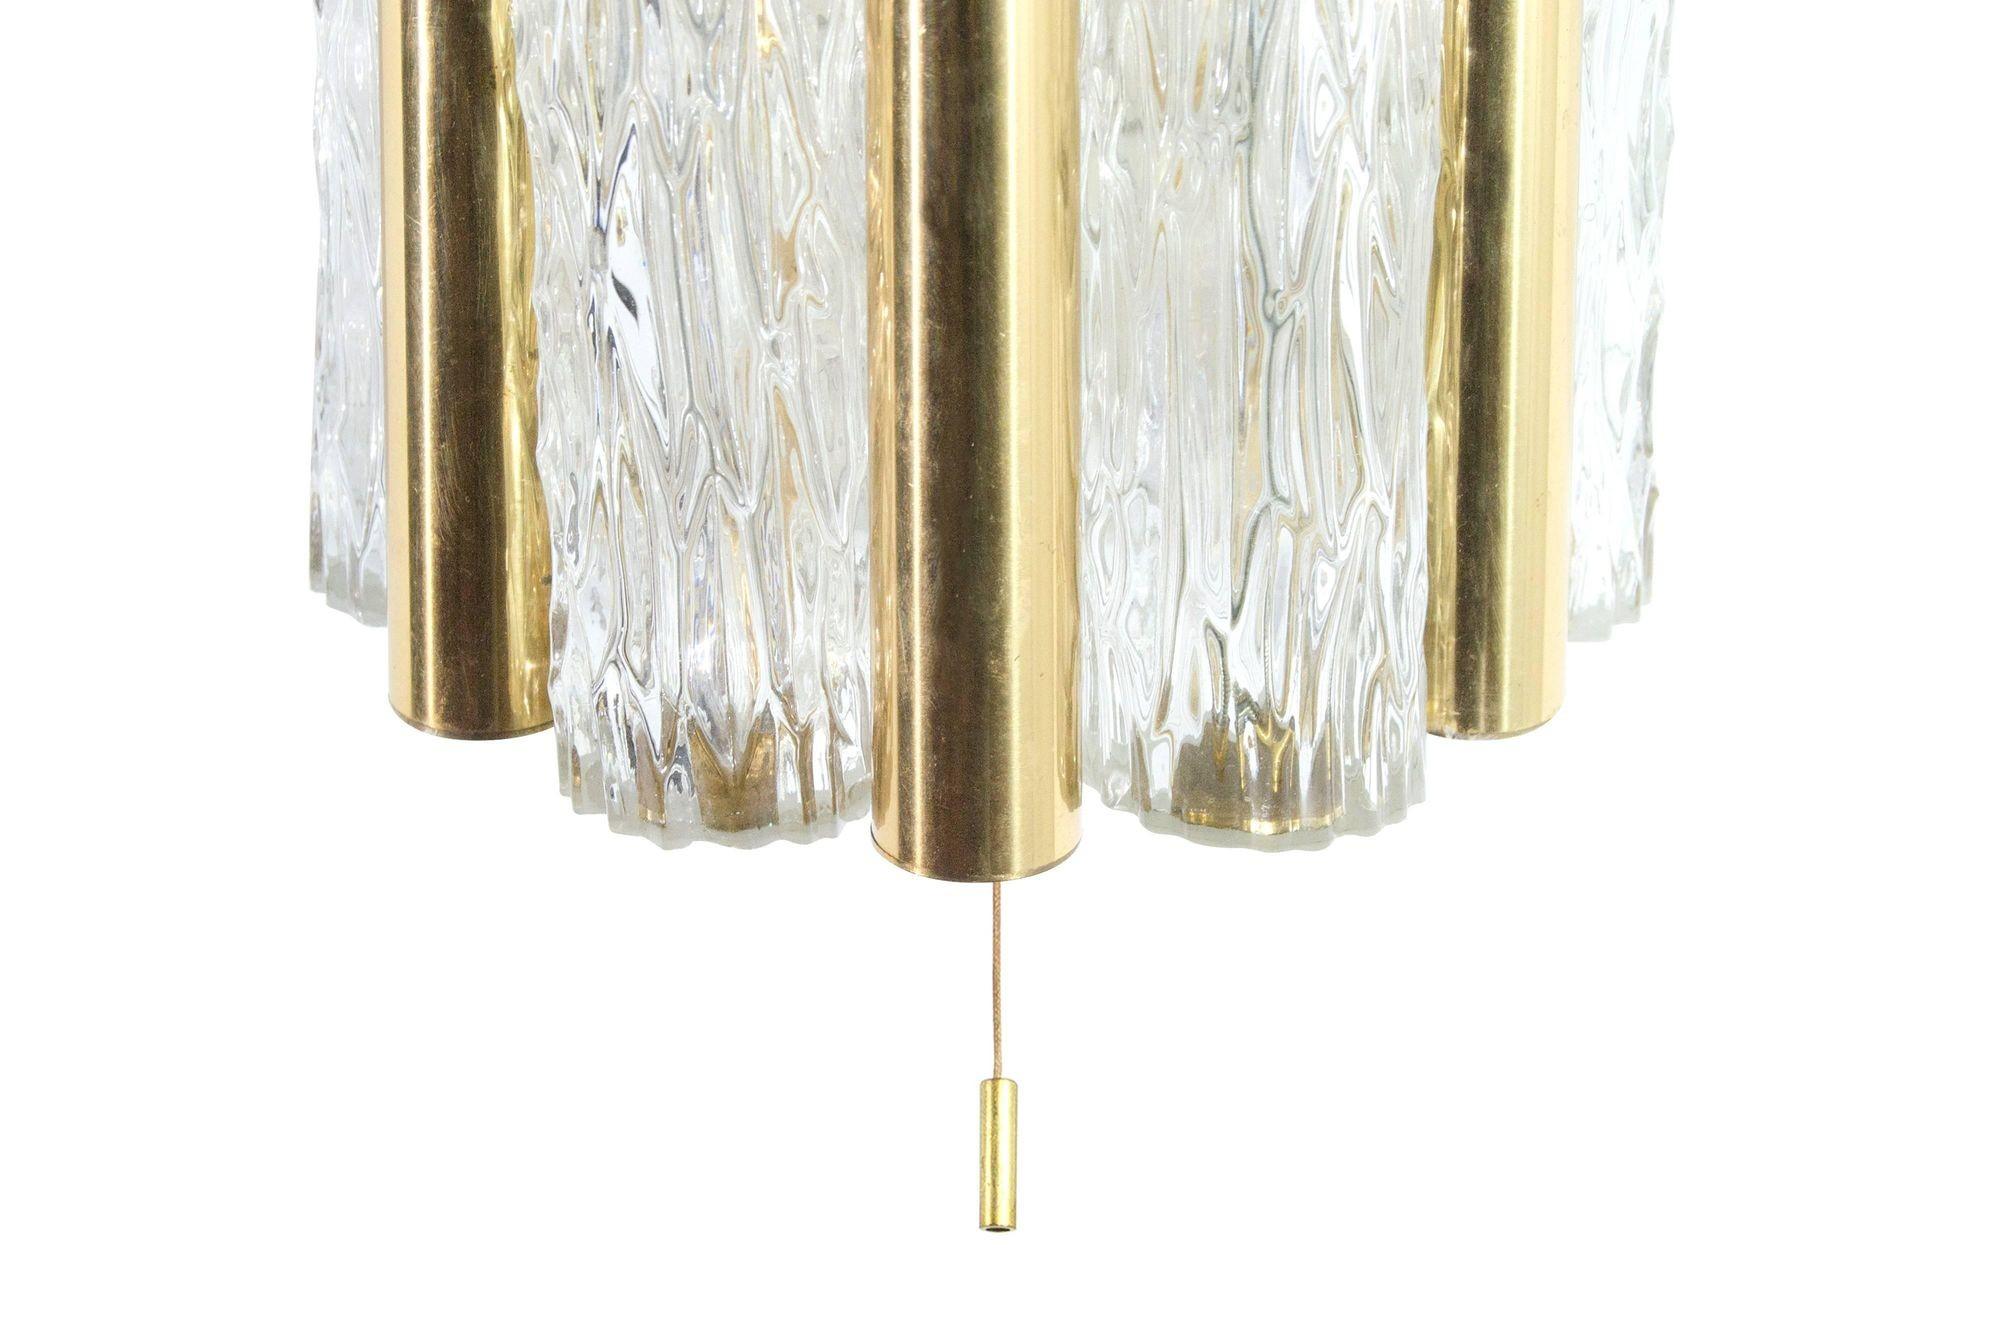 Set of Murano Glass and Brass Sconces by Doria Leuchten, Germany, C. 1960s In Excellent Condition For Sale In Westport, CT